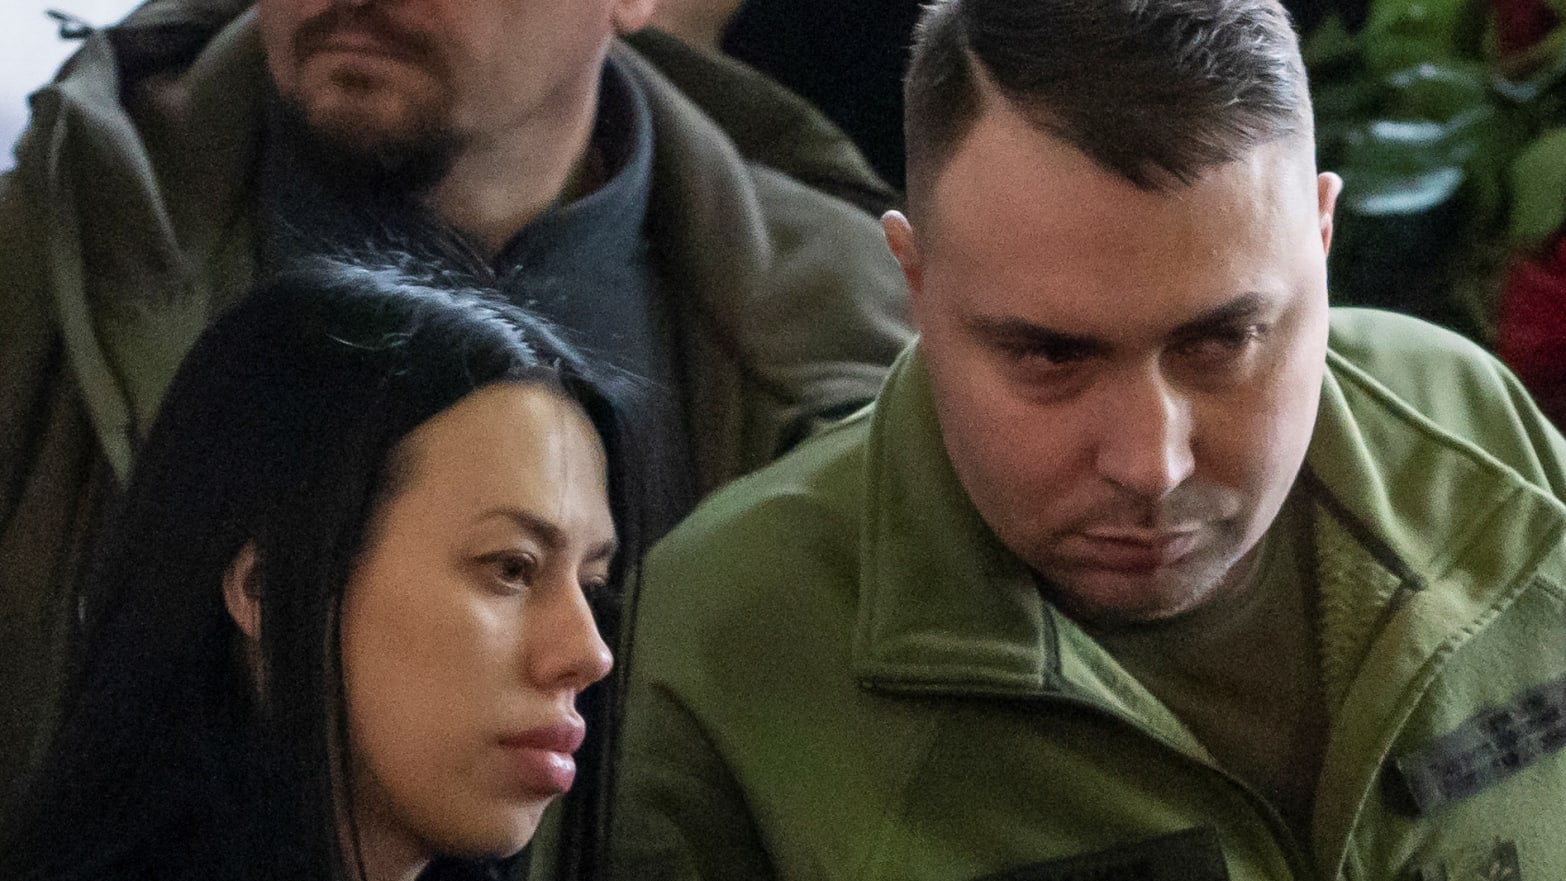 Ukraine’s Military Intelligence chief, Kyrylo Budanov, and his wife, Marianna, attend a memorial ceremony for Ukrainian interior minister, his deputy and officials on Jan. 21, 2023.